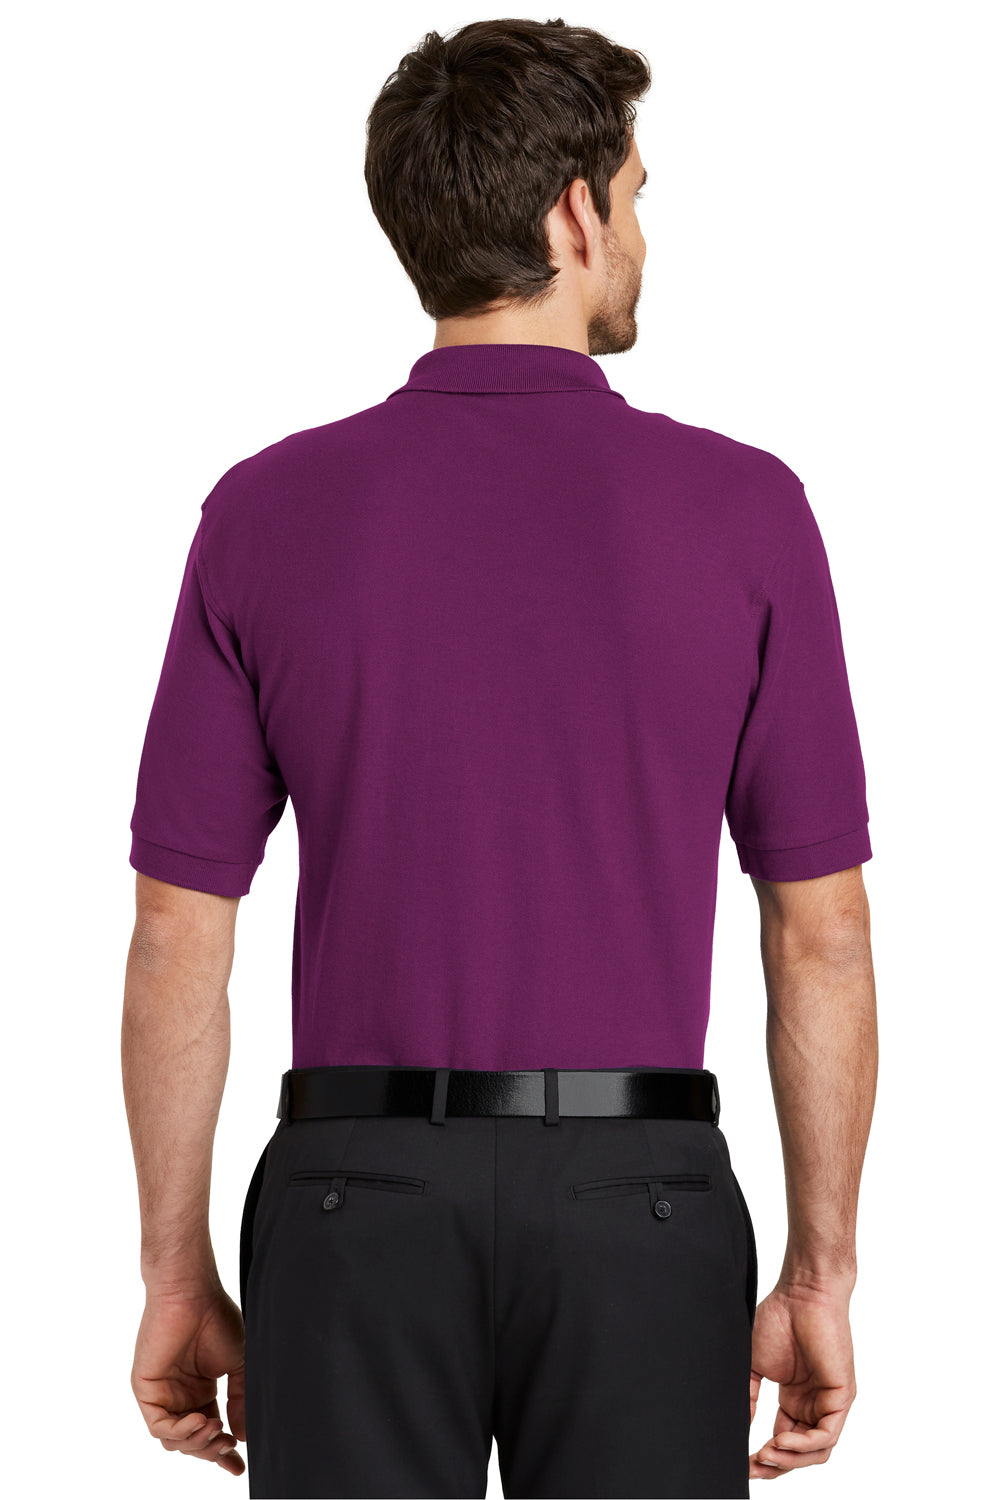 Port Authority K500 Mens Silk Touch Wrinkle Resistant Short Sleeve Polo Shirt Berry Purple Back